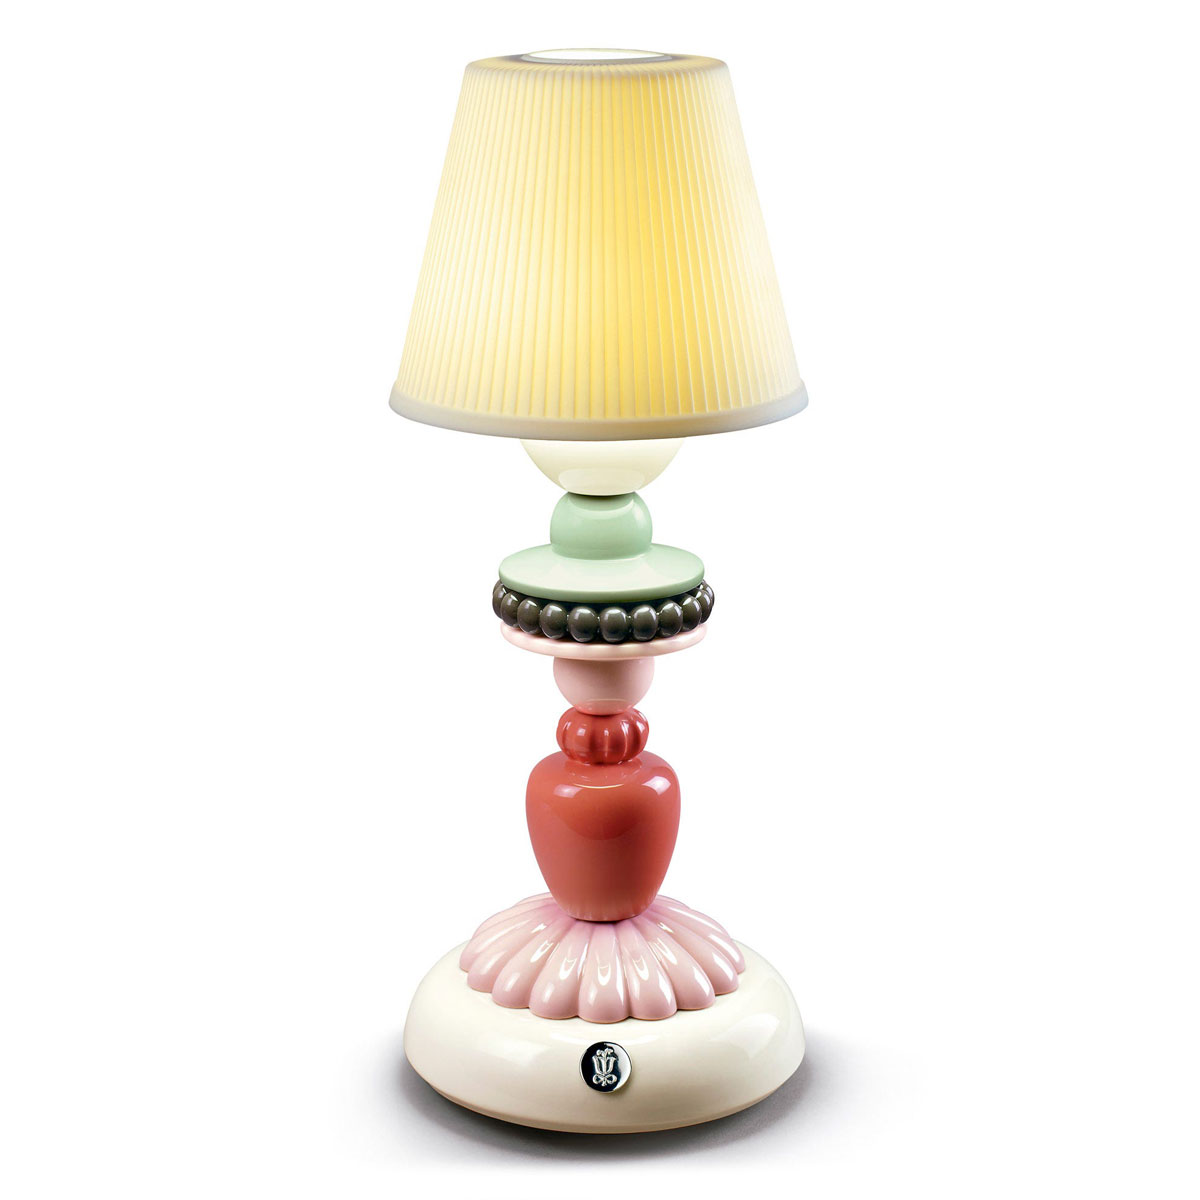 Lladro Light And Fragrance, Sunflower Firefly Table Lamp. Ivory